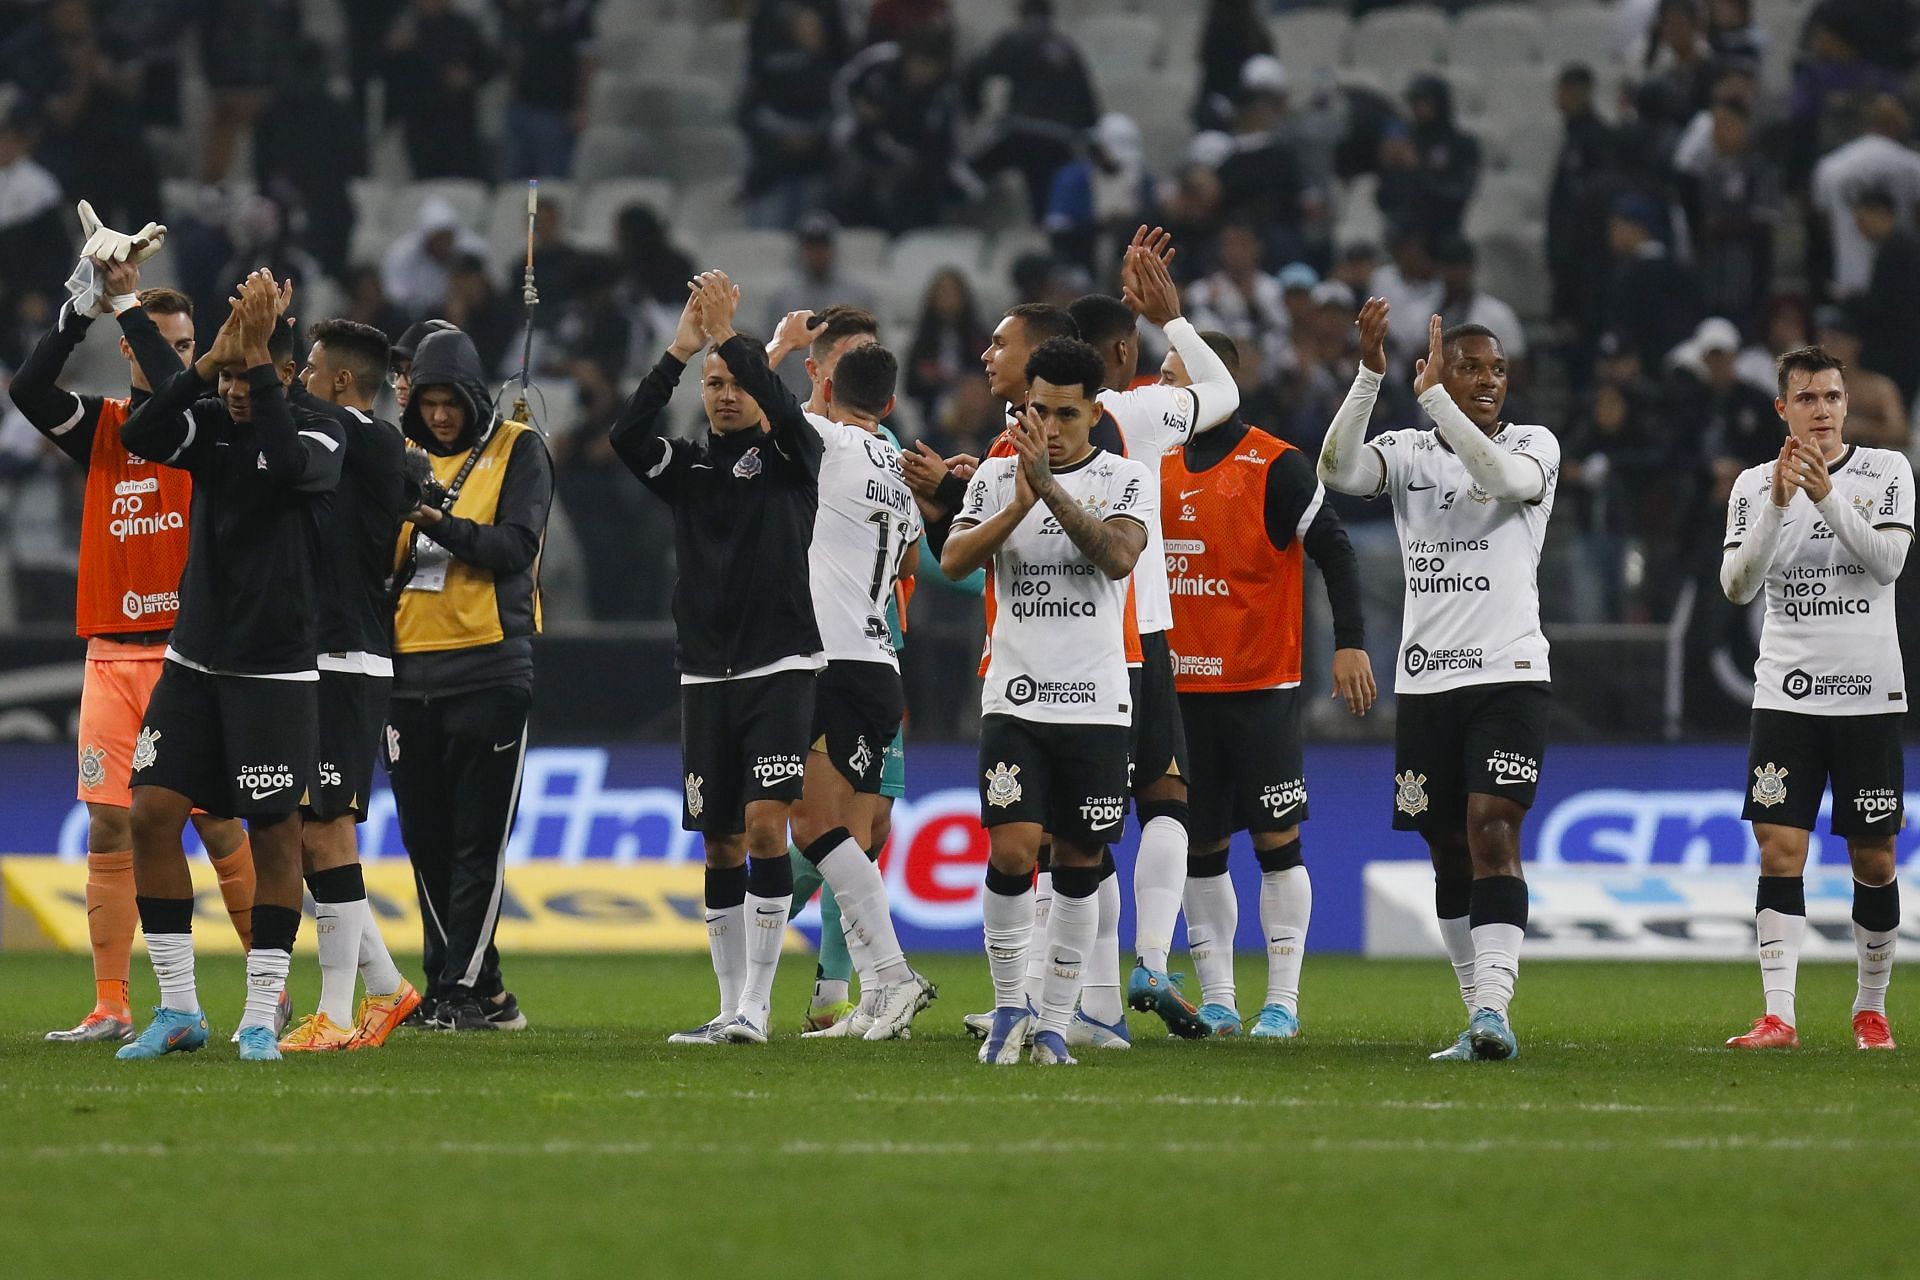 Corinthians and Santos square off in their Brazilian Serie A fixture on Saturday night